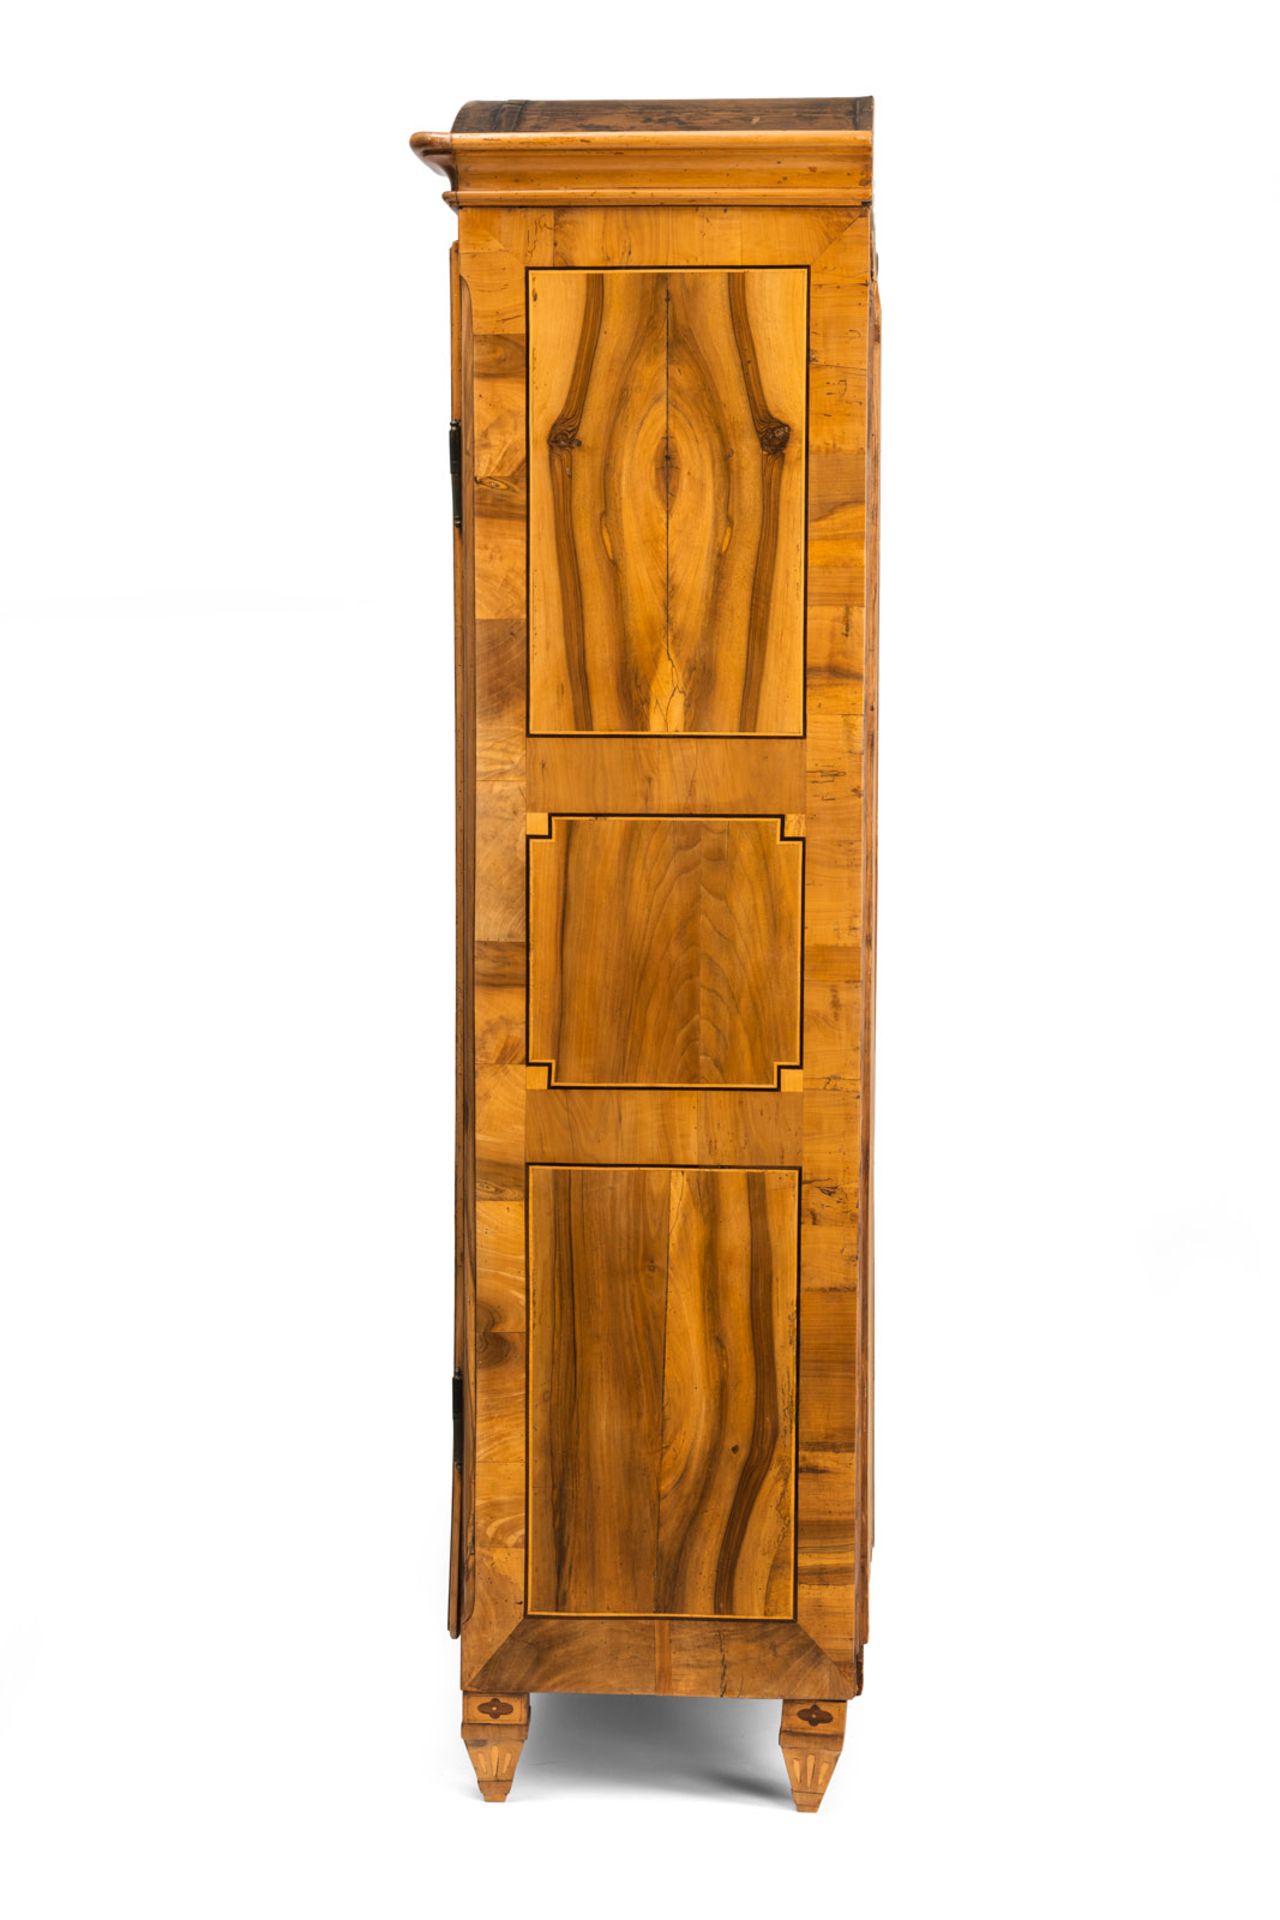 AN AUSTRIAN BRASS MOUNTED WALNUT AND MARQUTRIED JOSEPHINIAN CUPBOARD - Image 8 of 10